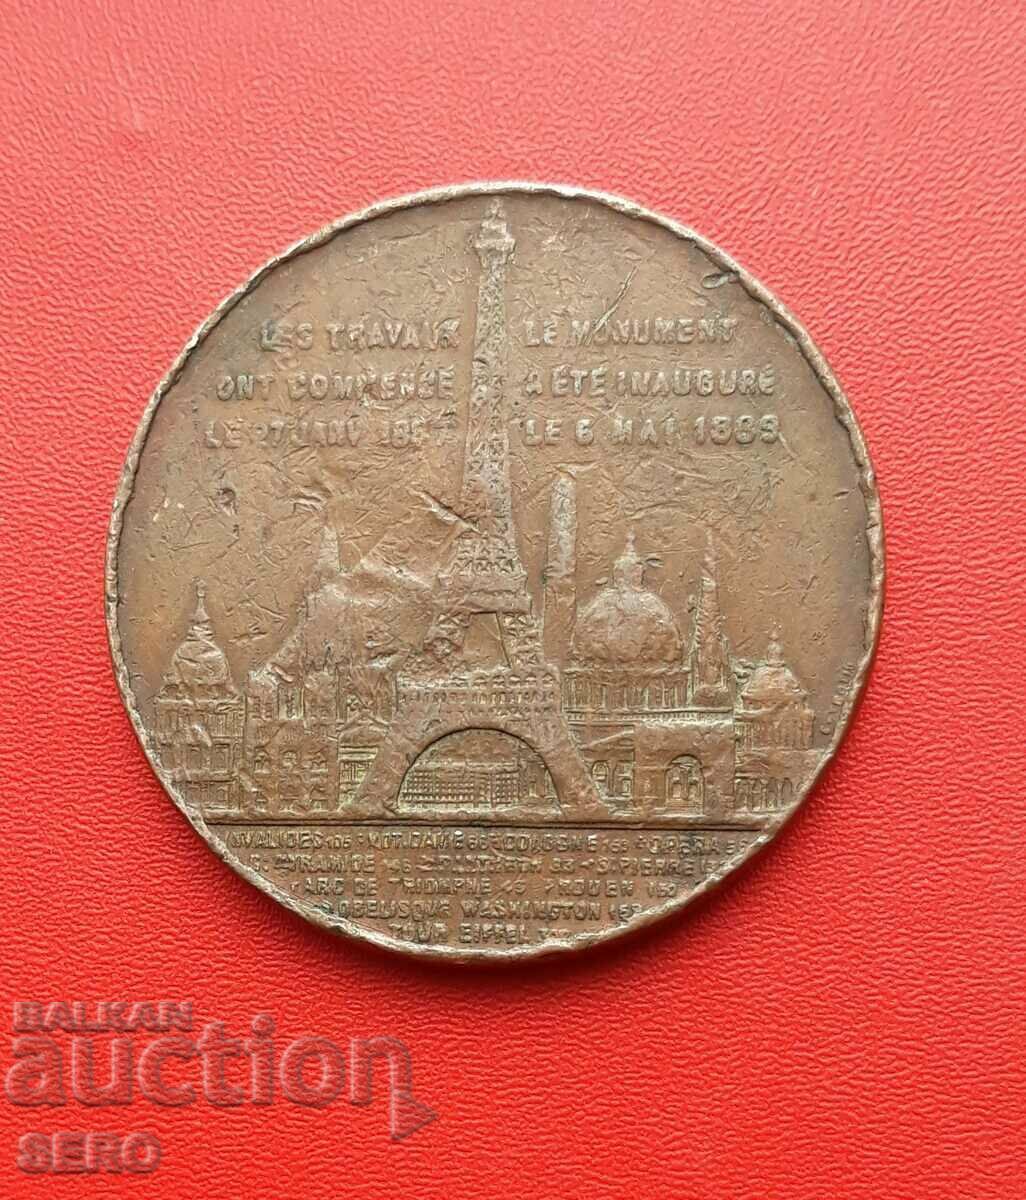 France-medal 1889- for the construction of the Eiffel Tower